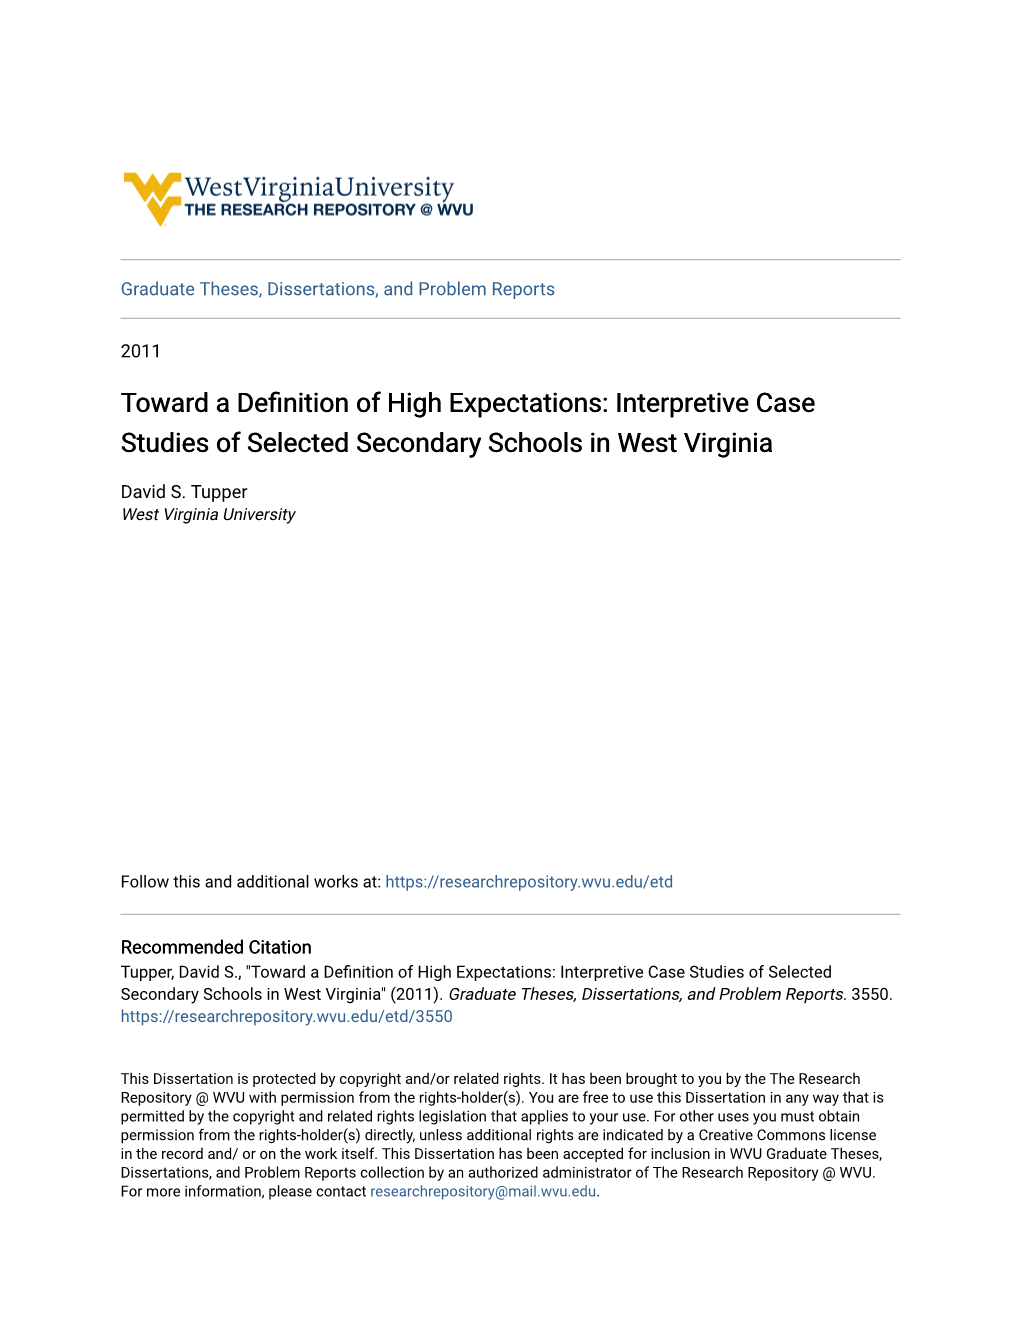 Toward a Definition of High Expectations: Interpretive Case Studies of Selected Secondary Schools in West Virginia